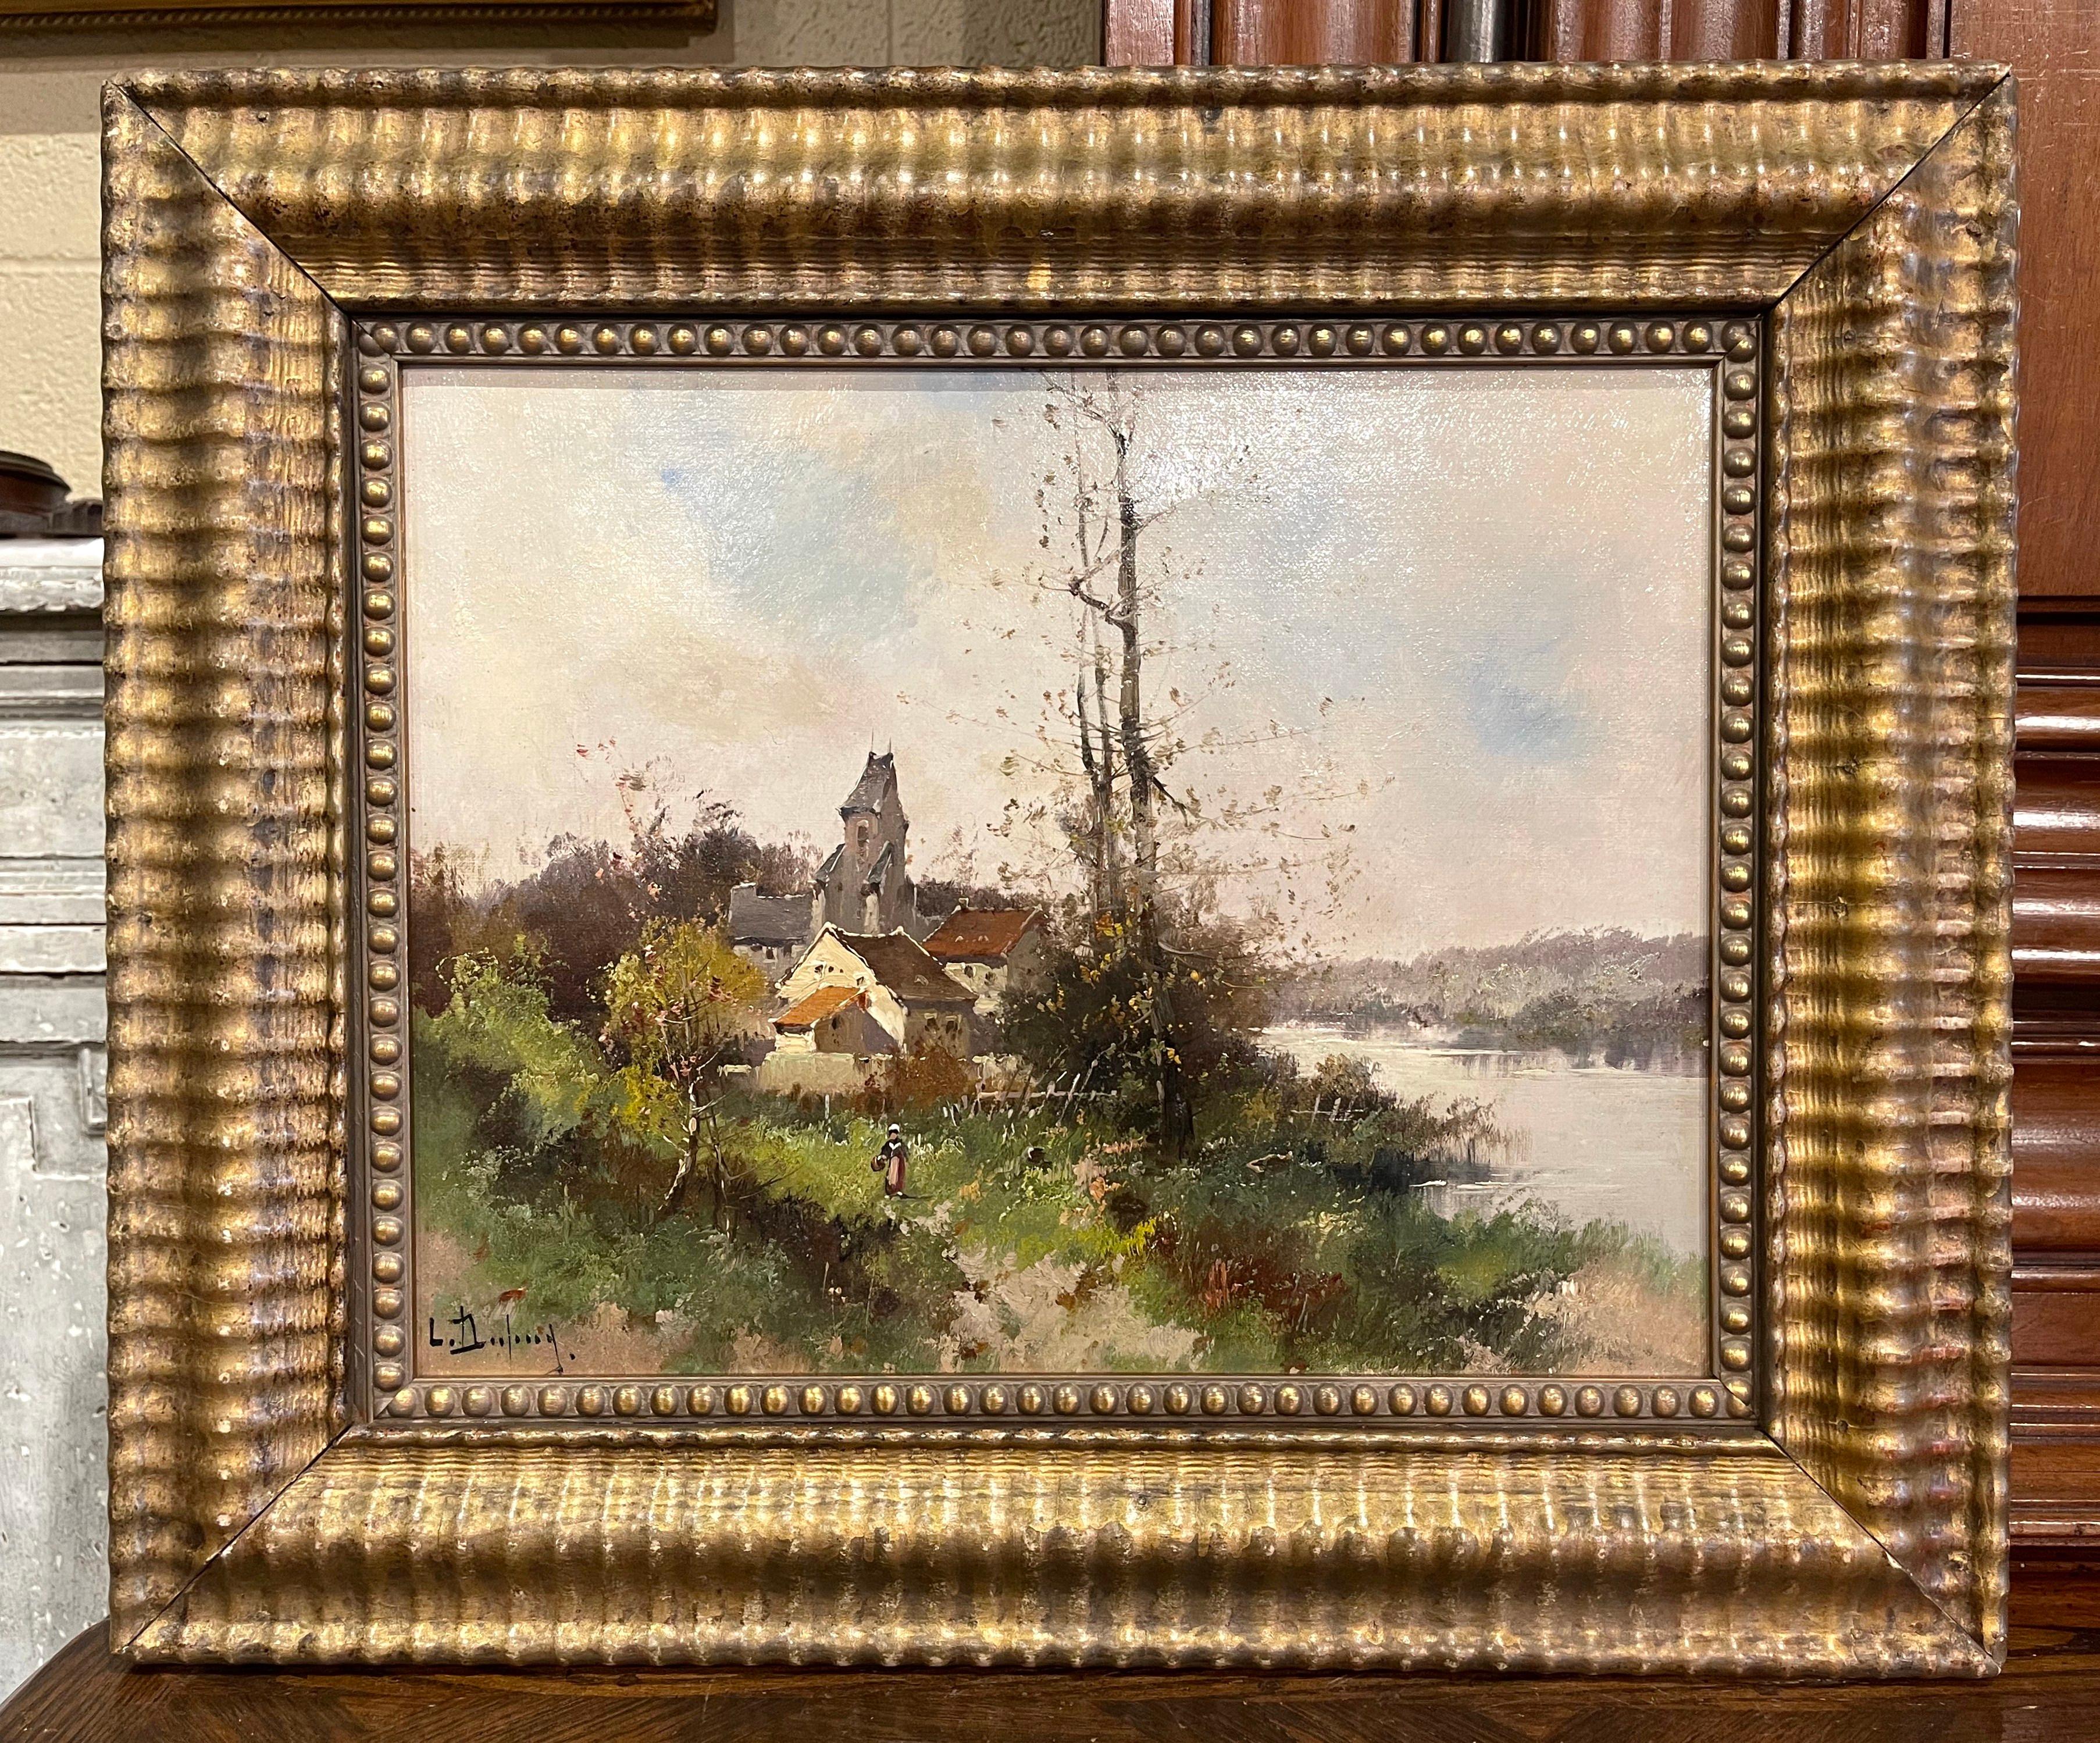  19th Century Framed Landscape Oil Painting Signed L. Dupuy for E. Galien-Laloue In Excellent Condition For Sale In Dallas, TX